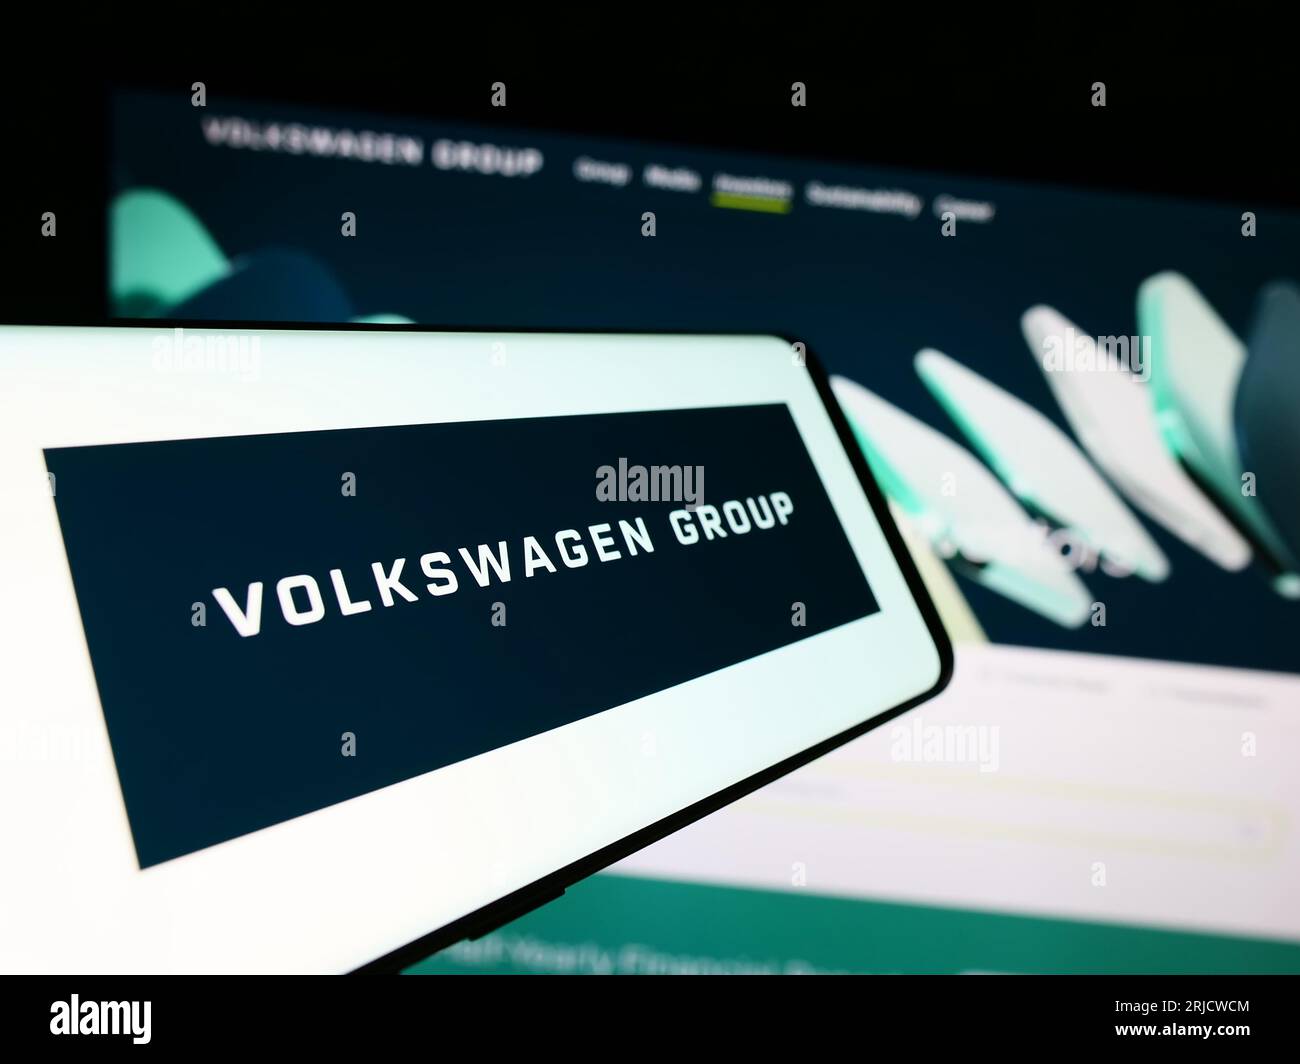 Smartphone with logo of German automotive company Volkswagen AG on screen in front of business website. Focus on center-left of phone display. Stock Photo